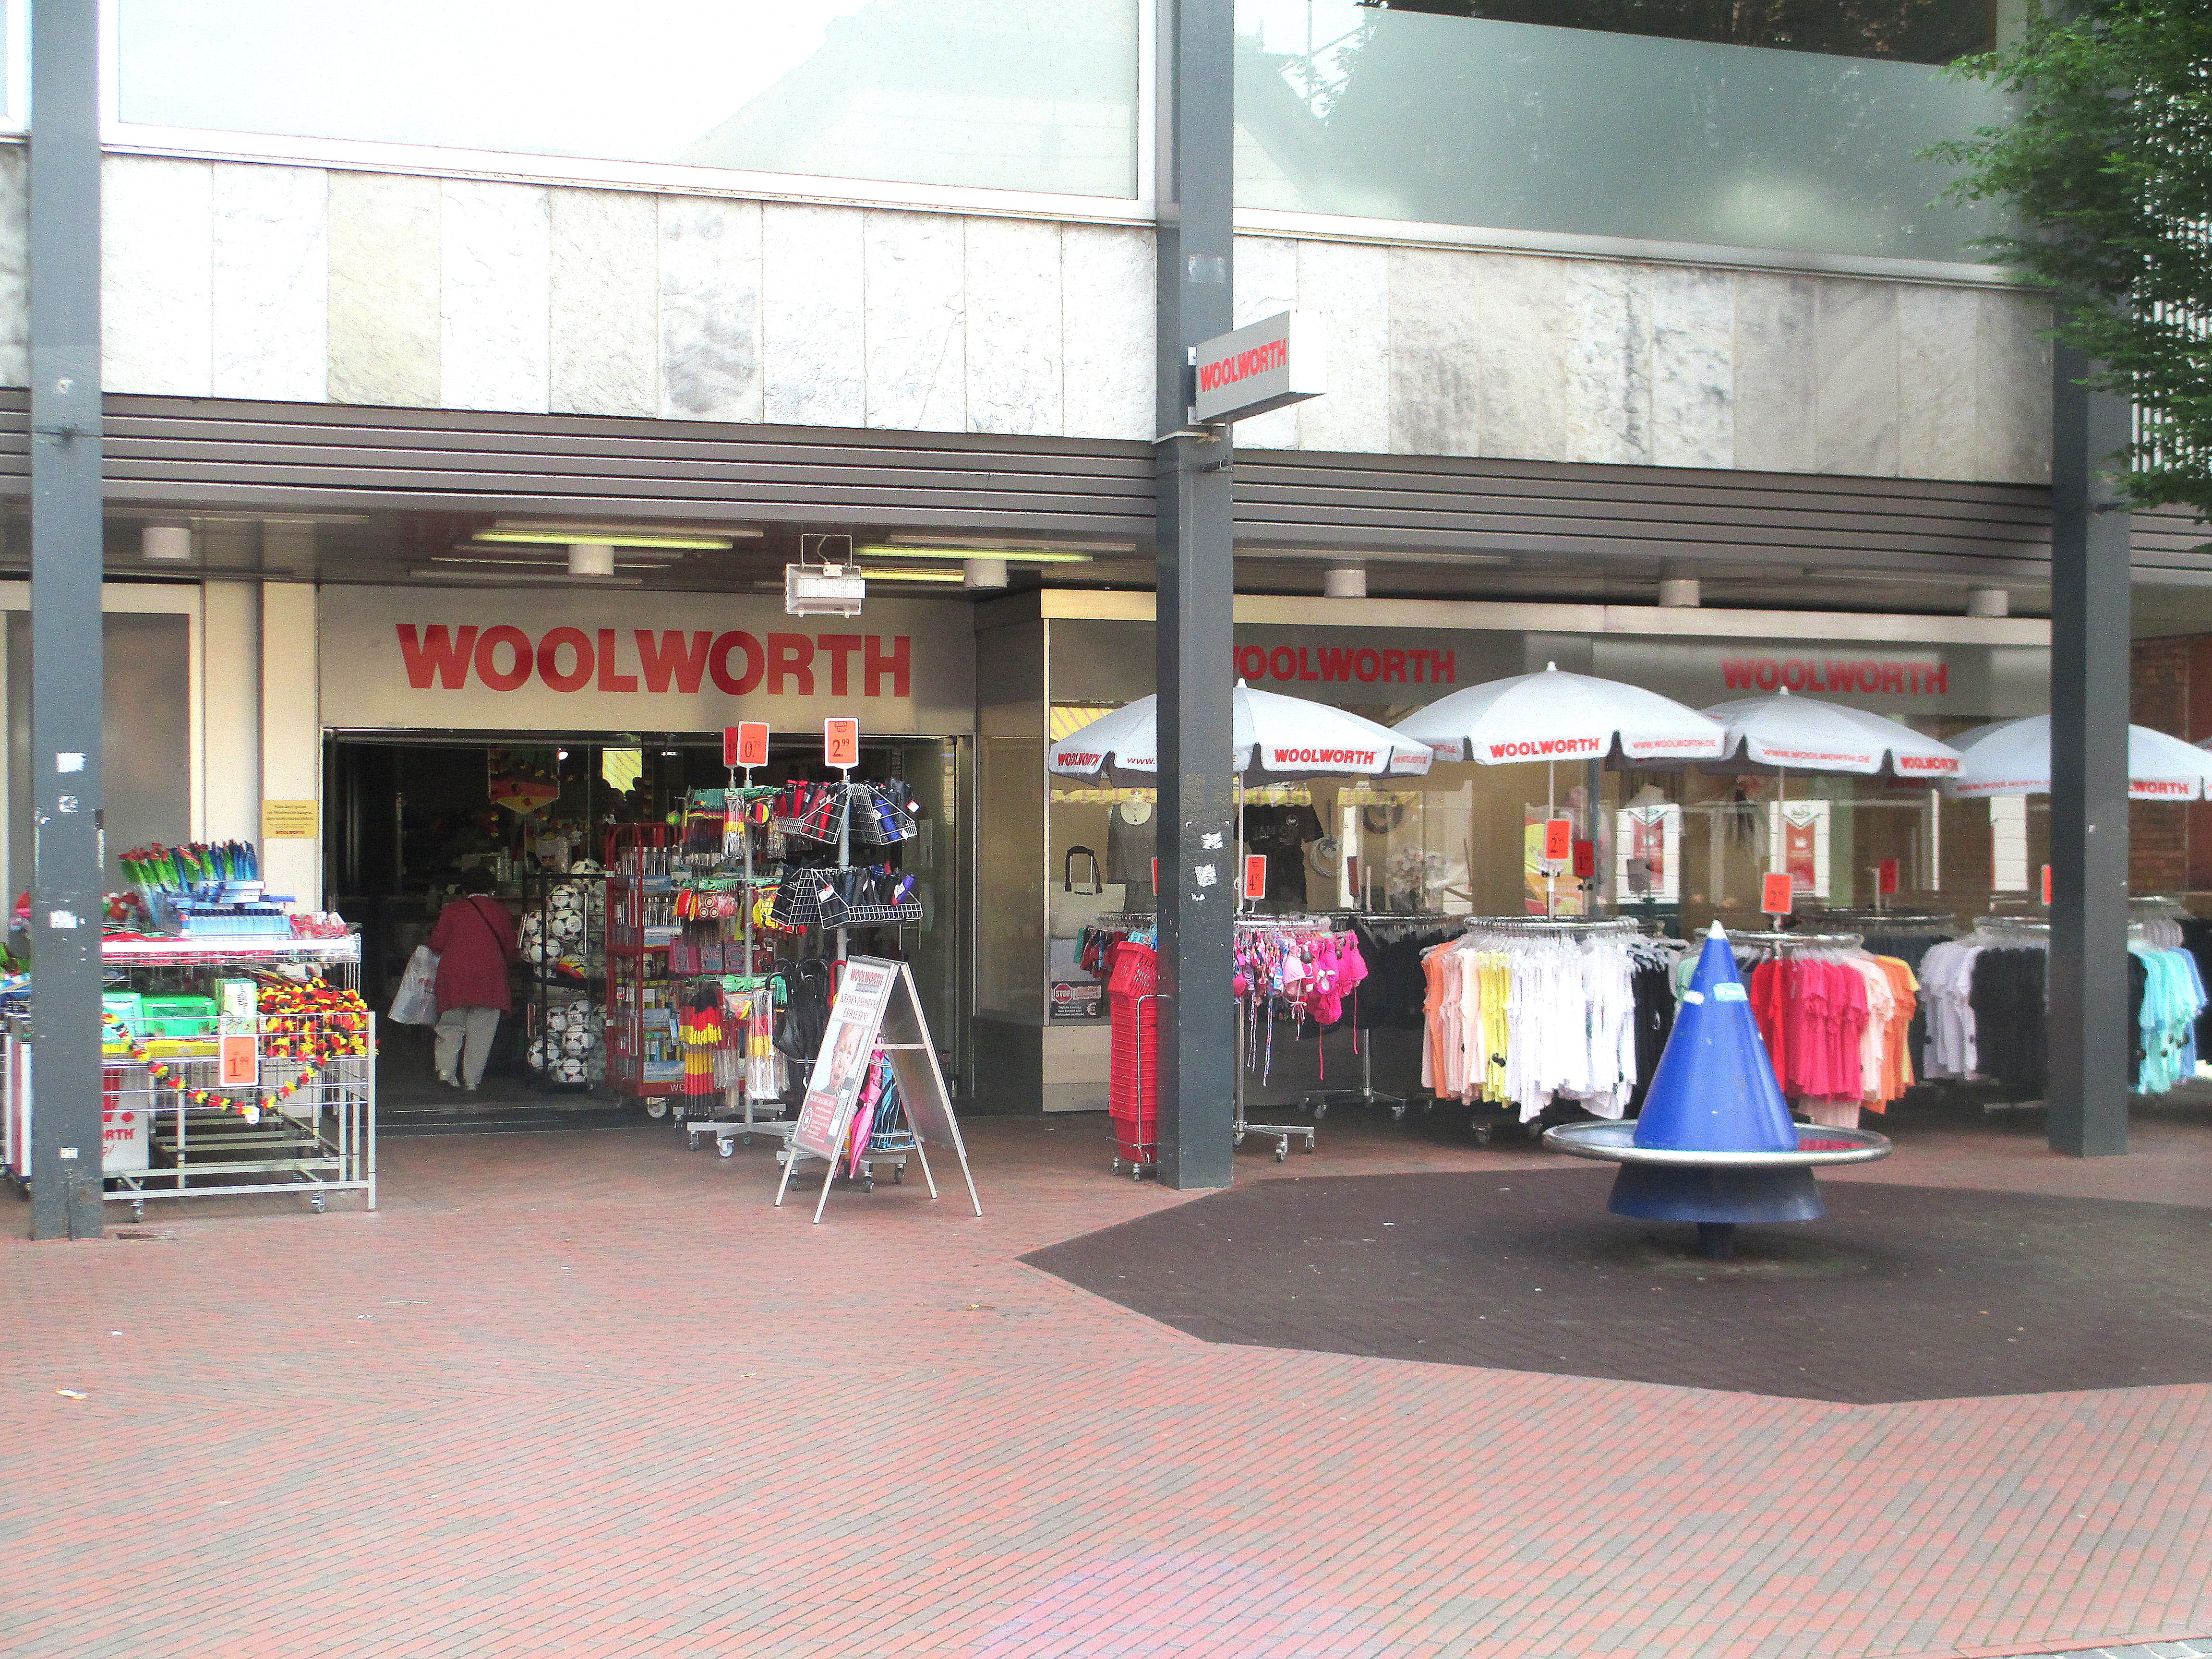 Woolworth, Obstallee 28-30 in Berlin